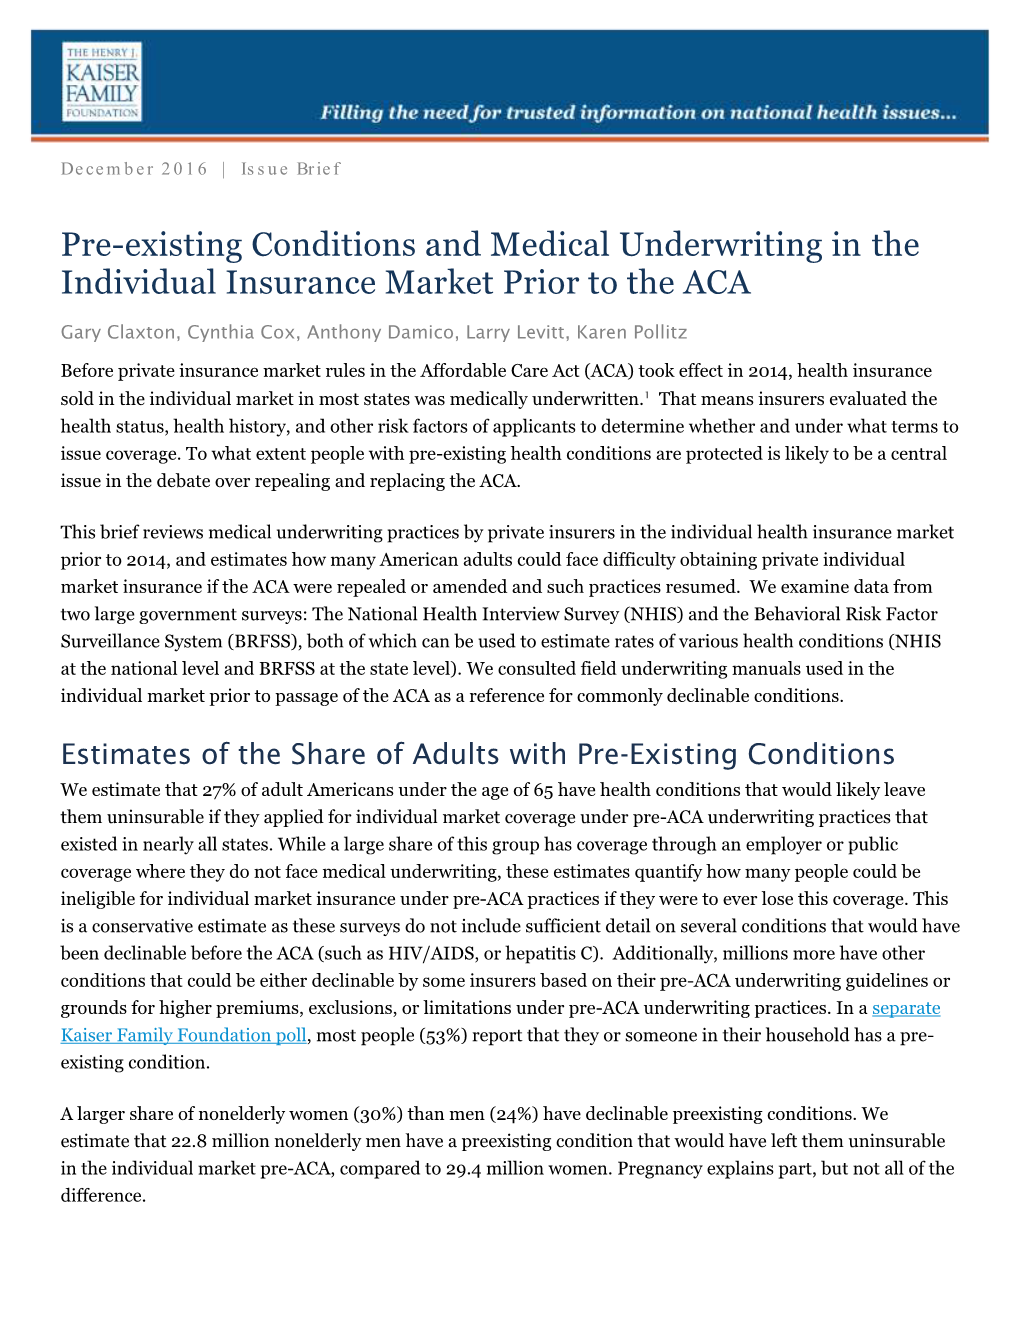 Pre-Existing Conditions and Medical Underwriting in the Individual Insurance Market Prior to the ACA